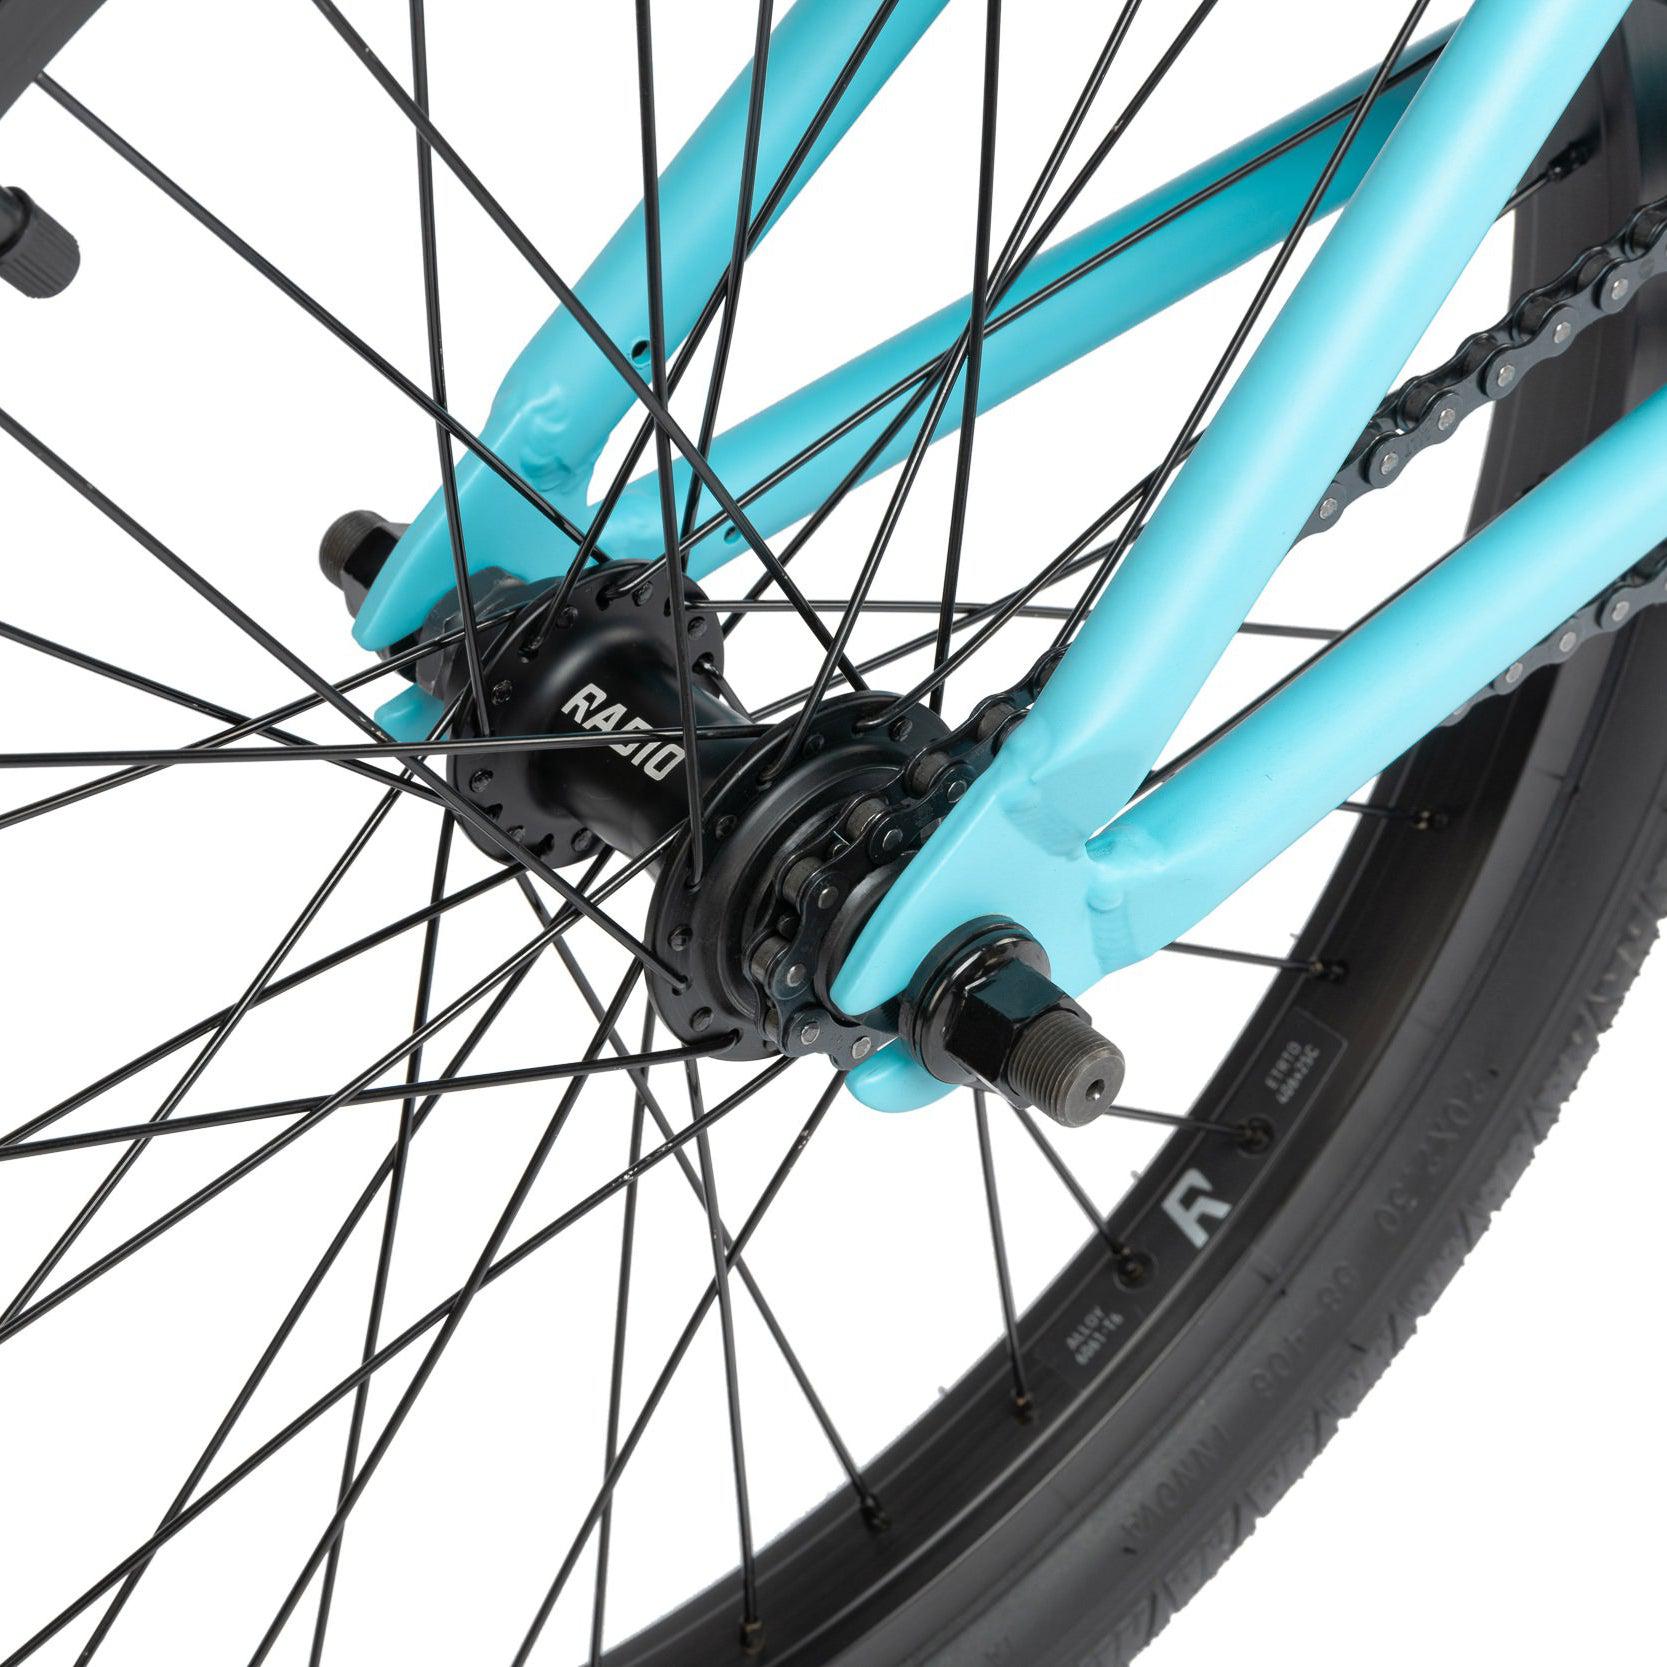 A close up of a turquoise Radio Evol 20 Bike wheel with black spokes.